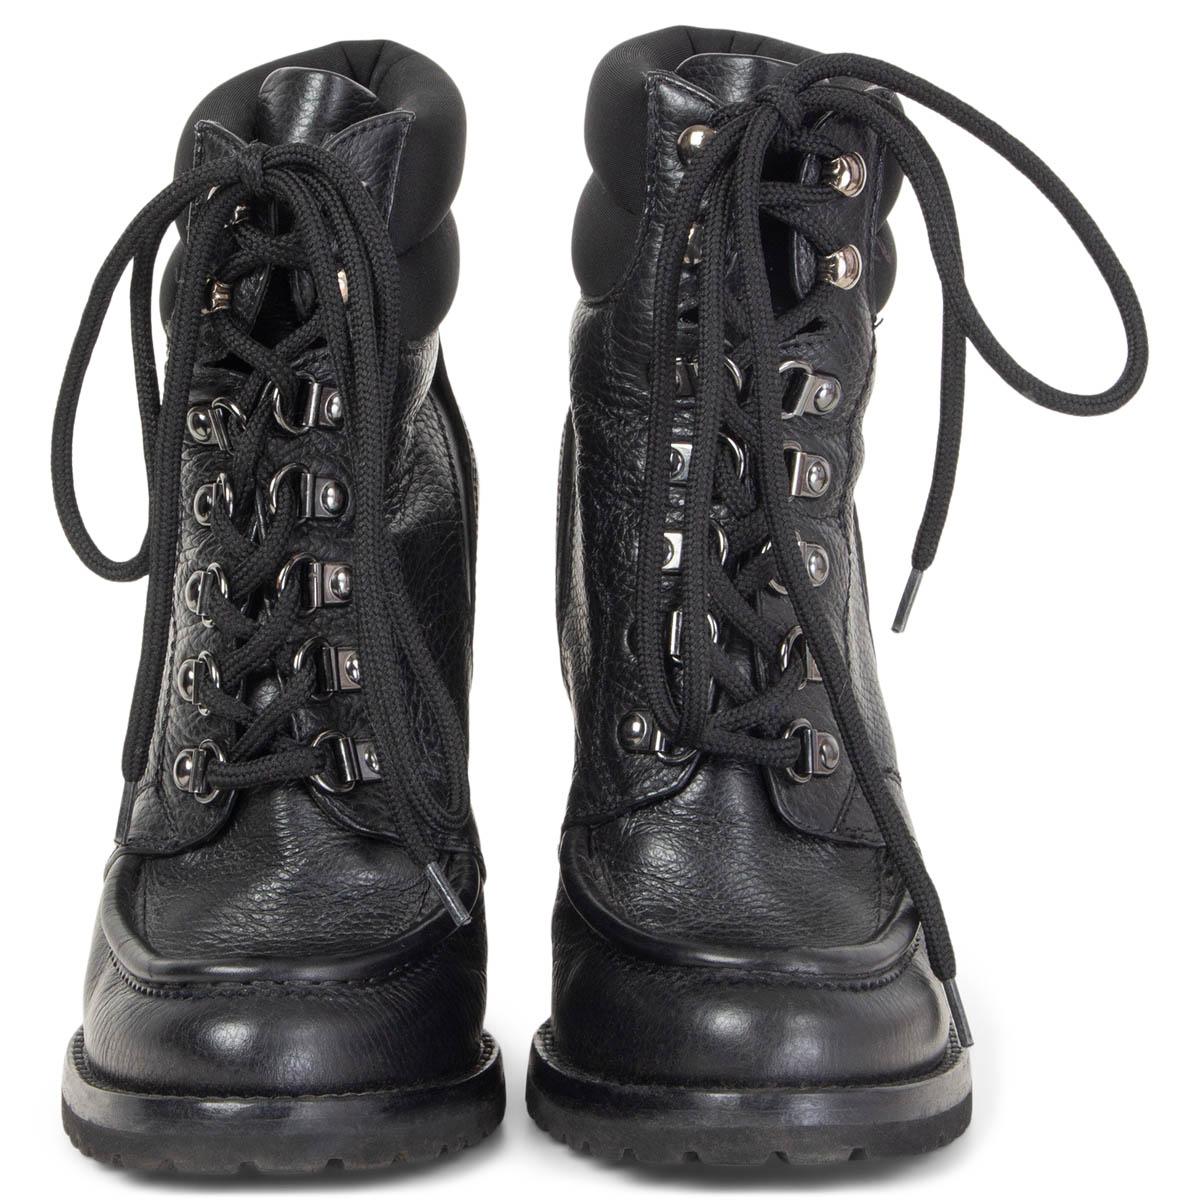 100% authentic Ermanno Scervino lace-up ankle-boots in black grained calfskin with padded ankle part in black nylon. Have been worn and are in excellent condition. Come with dust bag.

Measurements
Imprinted Size	37
Shoe Size	37
Inside Sole	24cm